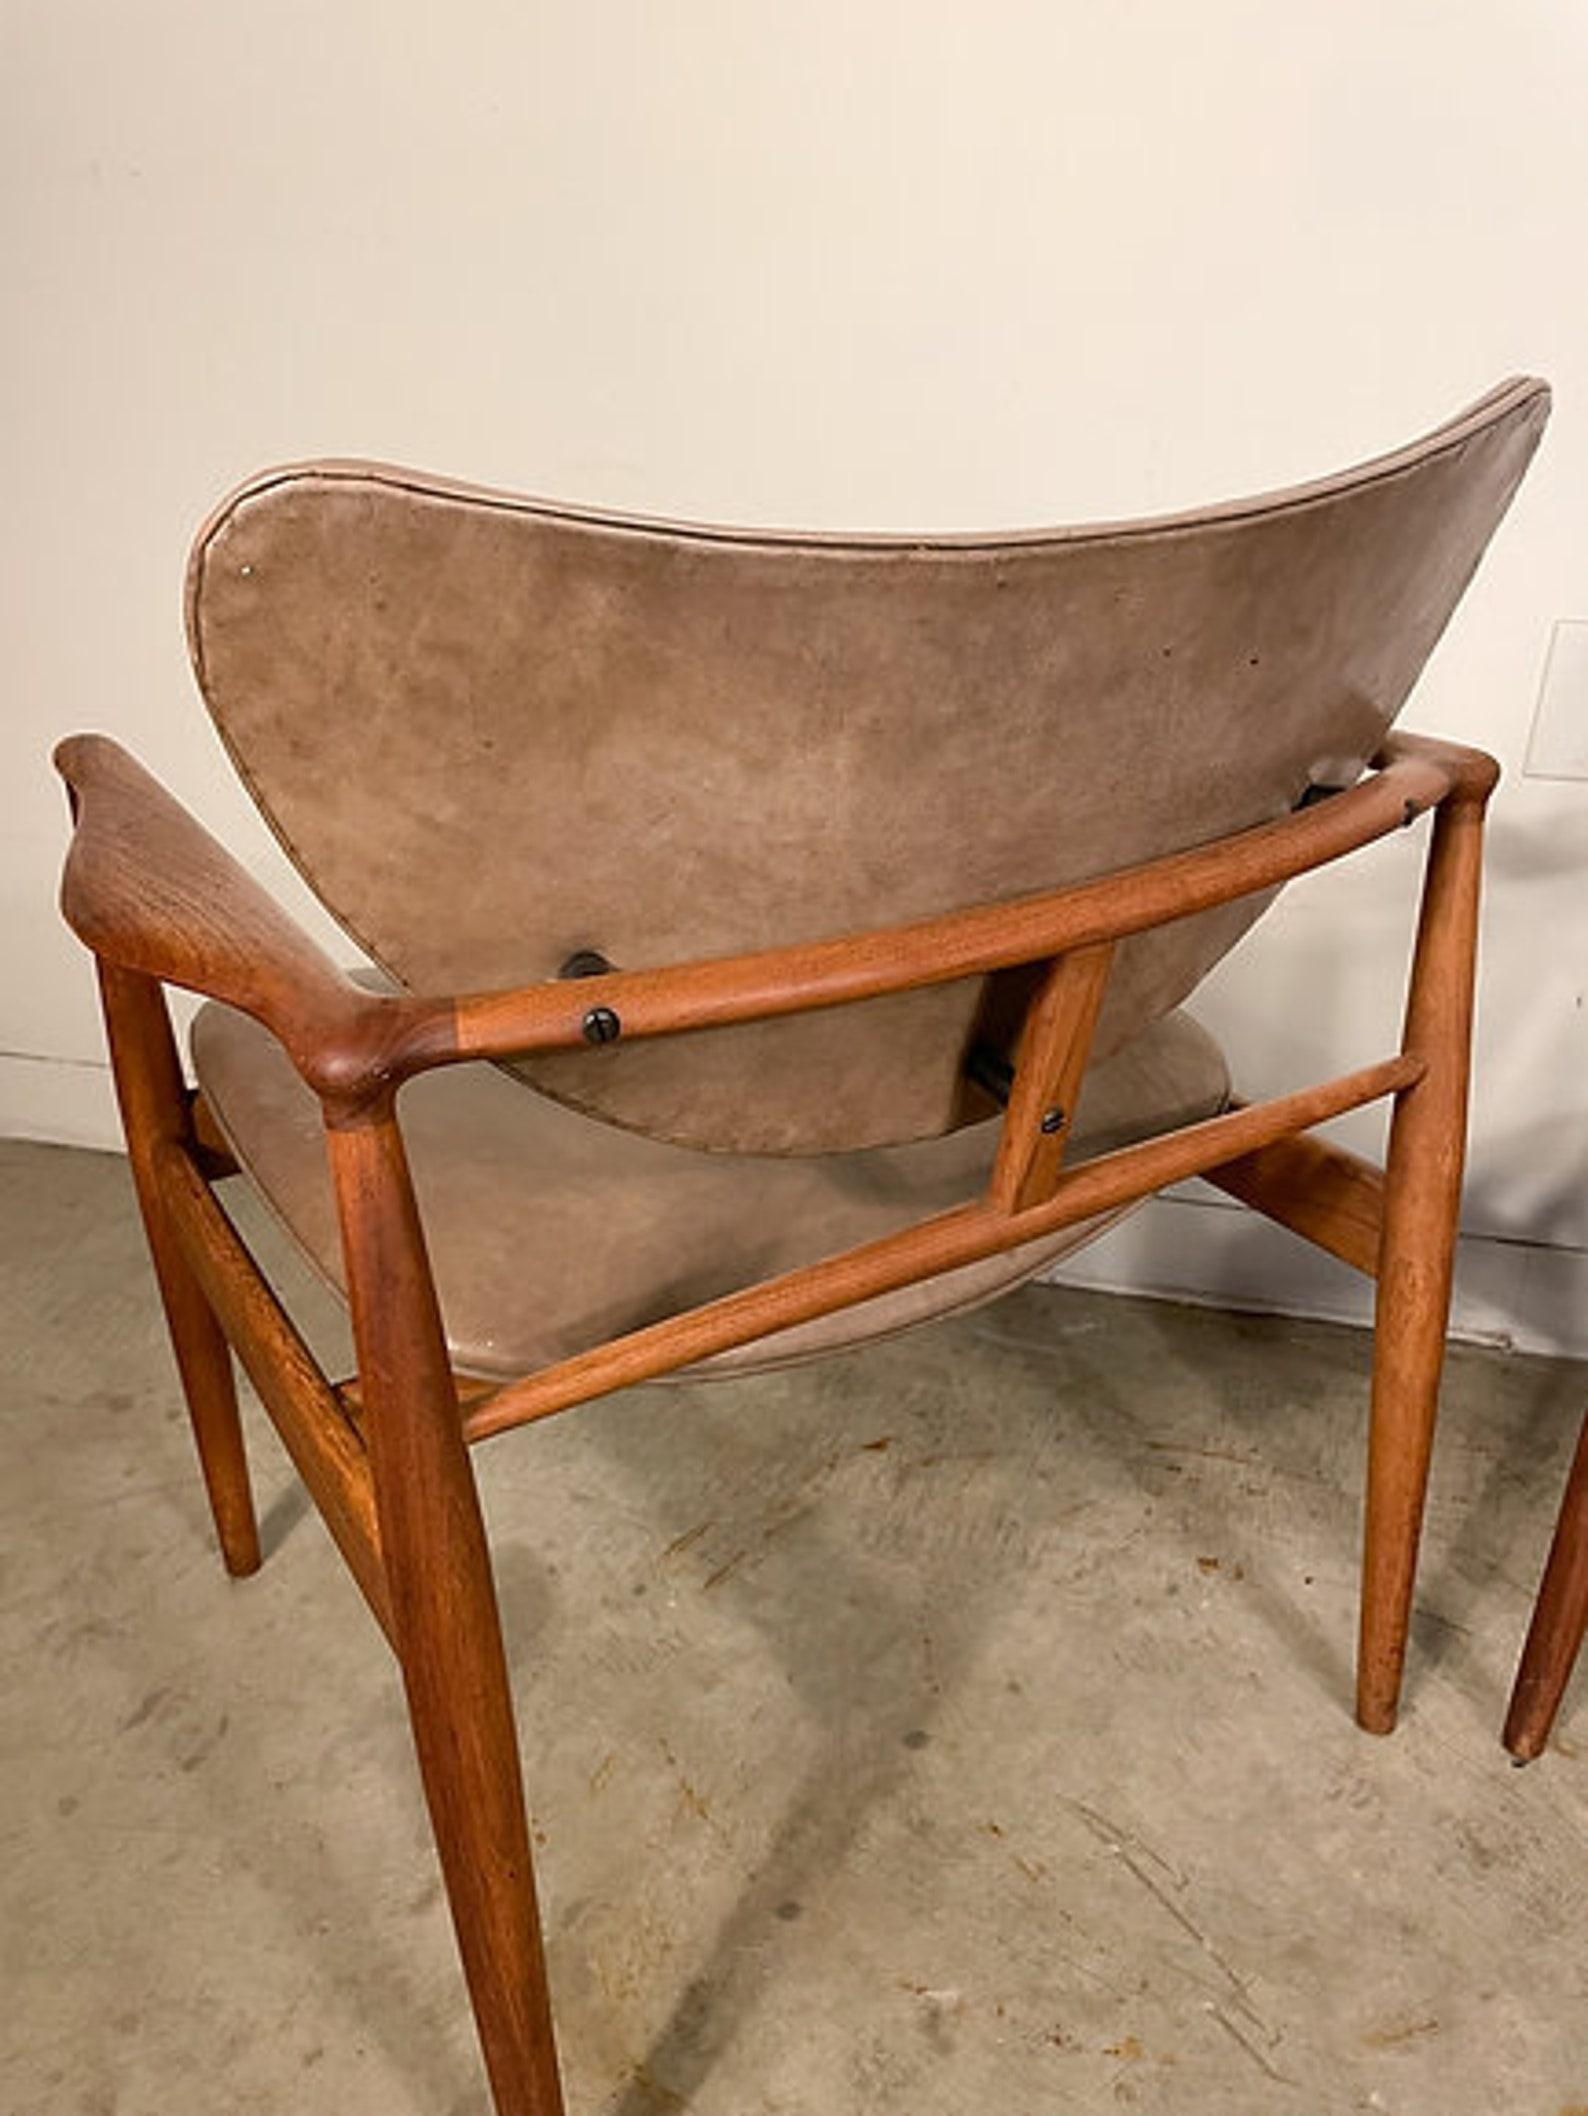 Iconic model 48 chairs were designed by Finn Juhl for Baker's Modern line in 1952. The chairs offer solid walnut frames that are beautifully sculpted and incredibly comfortable with an equally attractive curved seat and back. Original leather